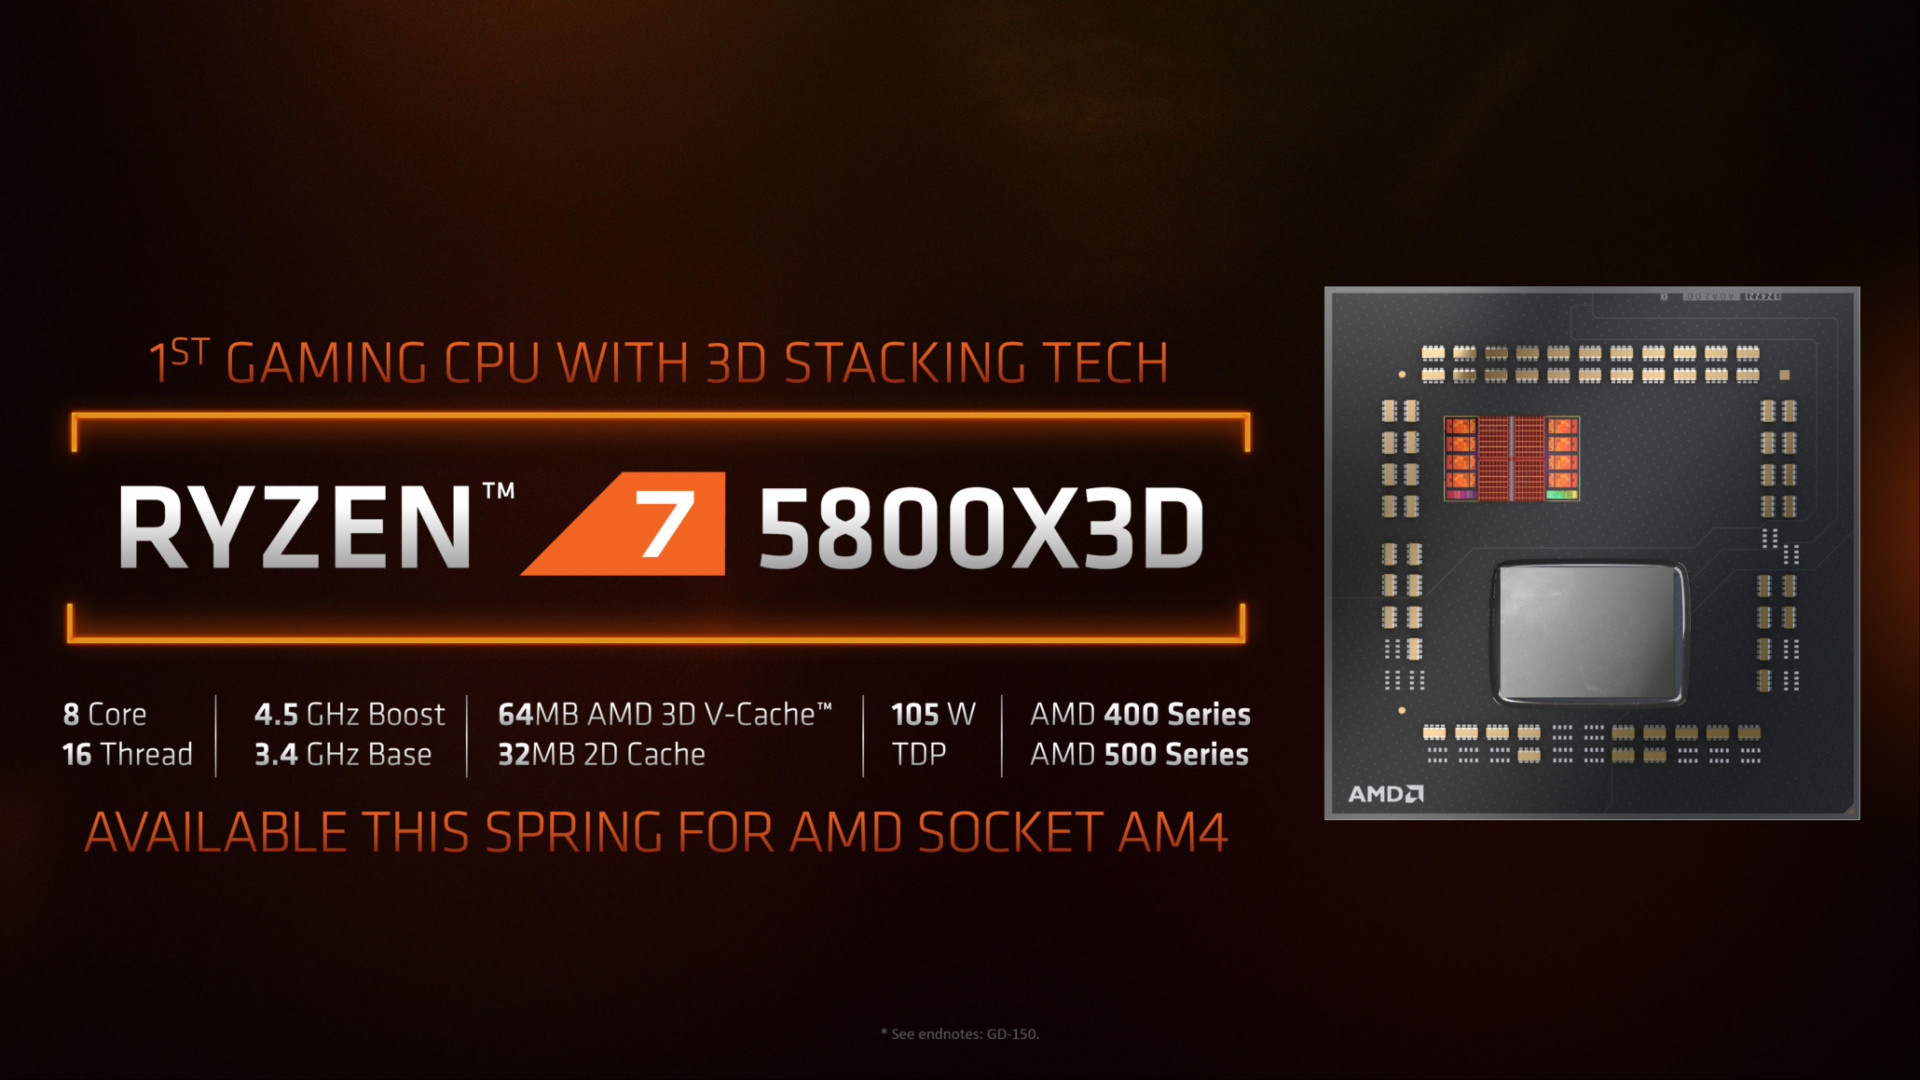 AMD Ryzen 7 5800X3D review: Holy smoke, AMD now has the best